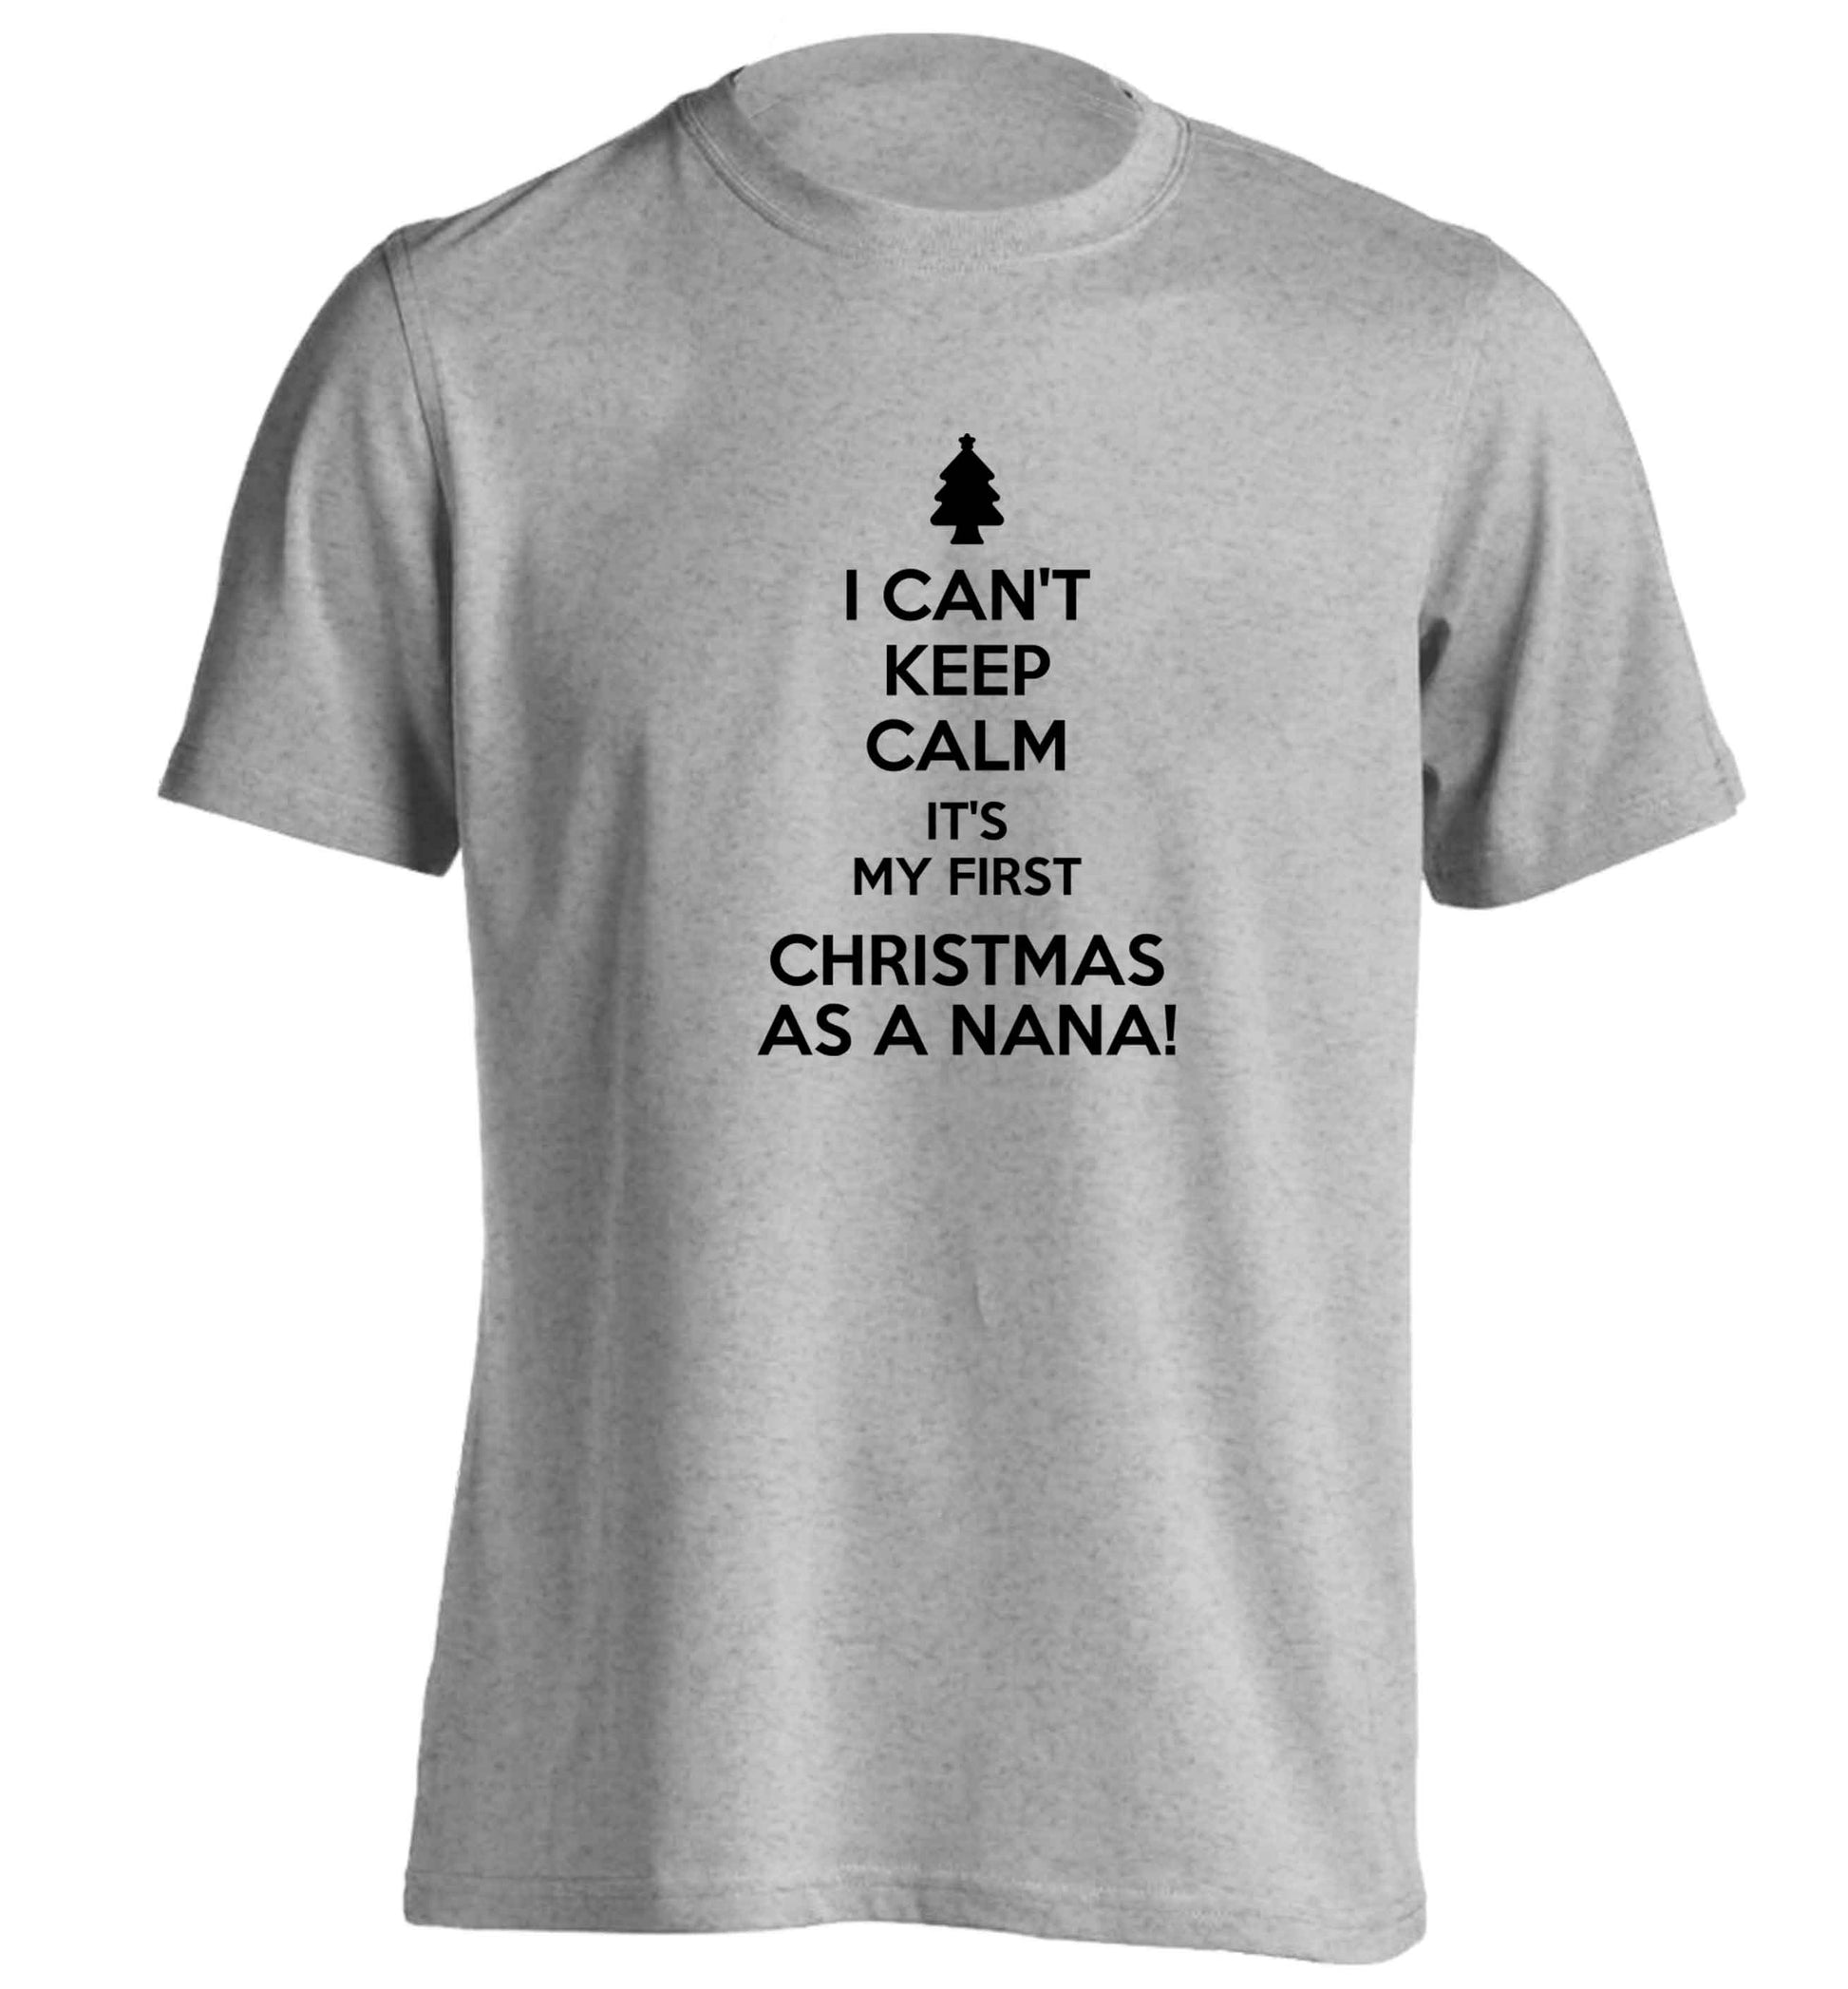 I can't keep calm it's my first Christmas as a nana! adults unisex grey Tshirt 2XL